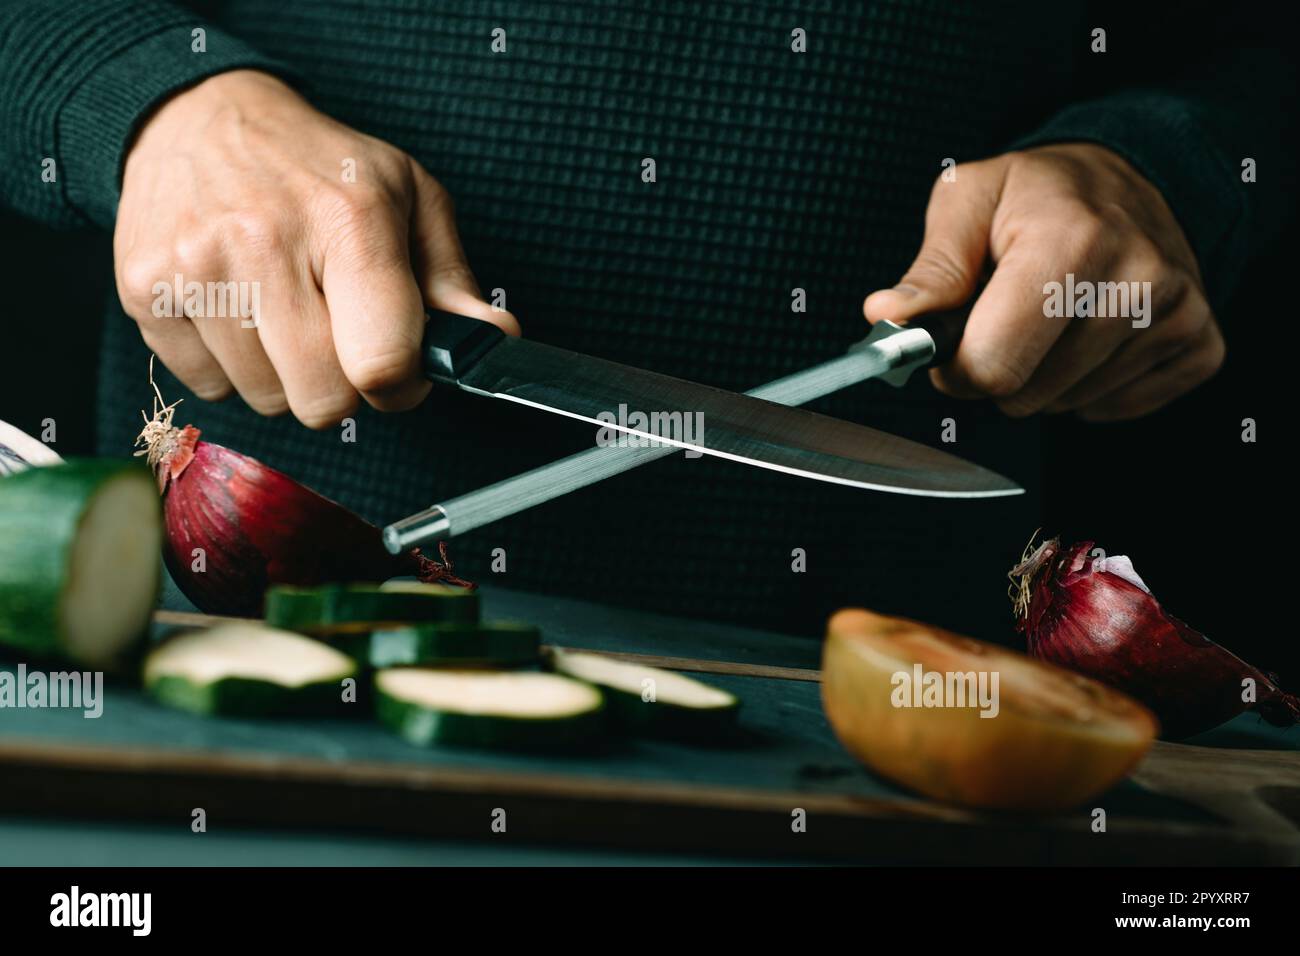 Sharpening Or Honing A Knife On A Waterstone Grindstone Stock Photo -  Download Image Now - iStock